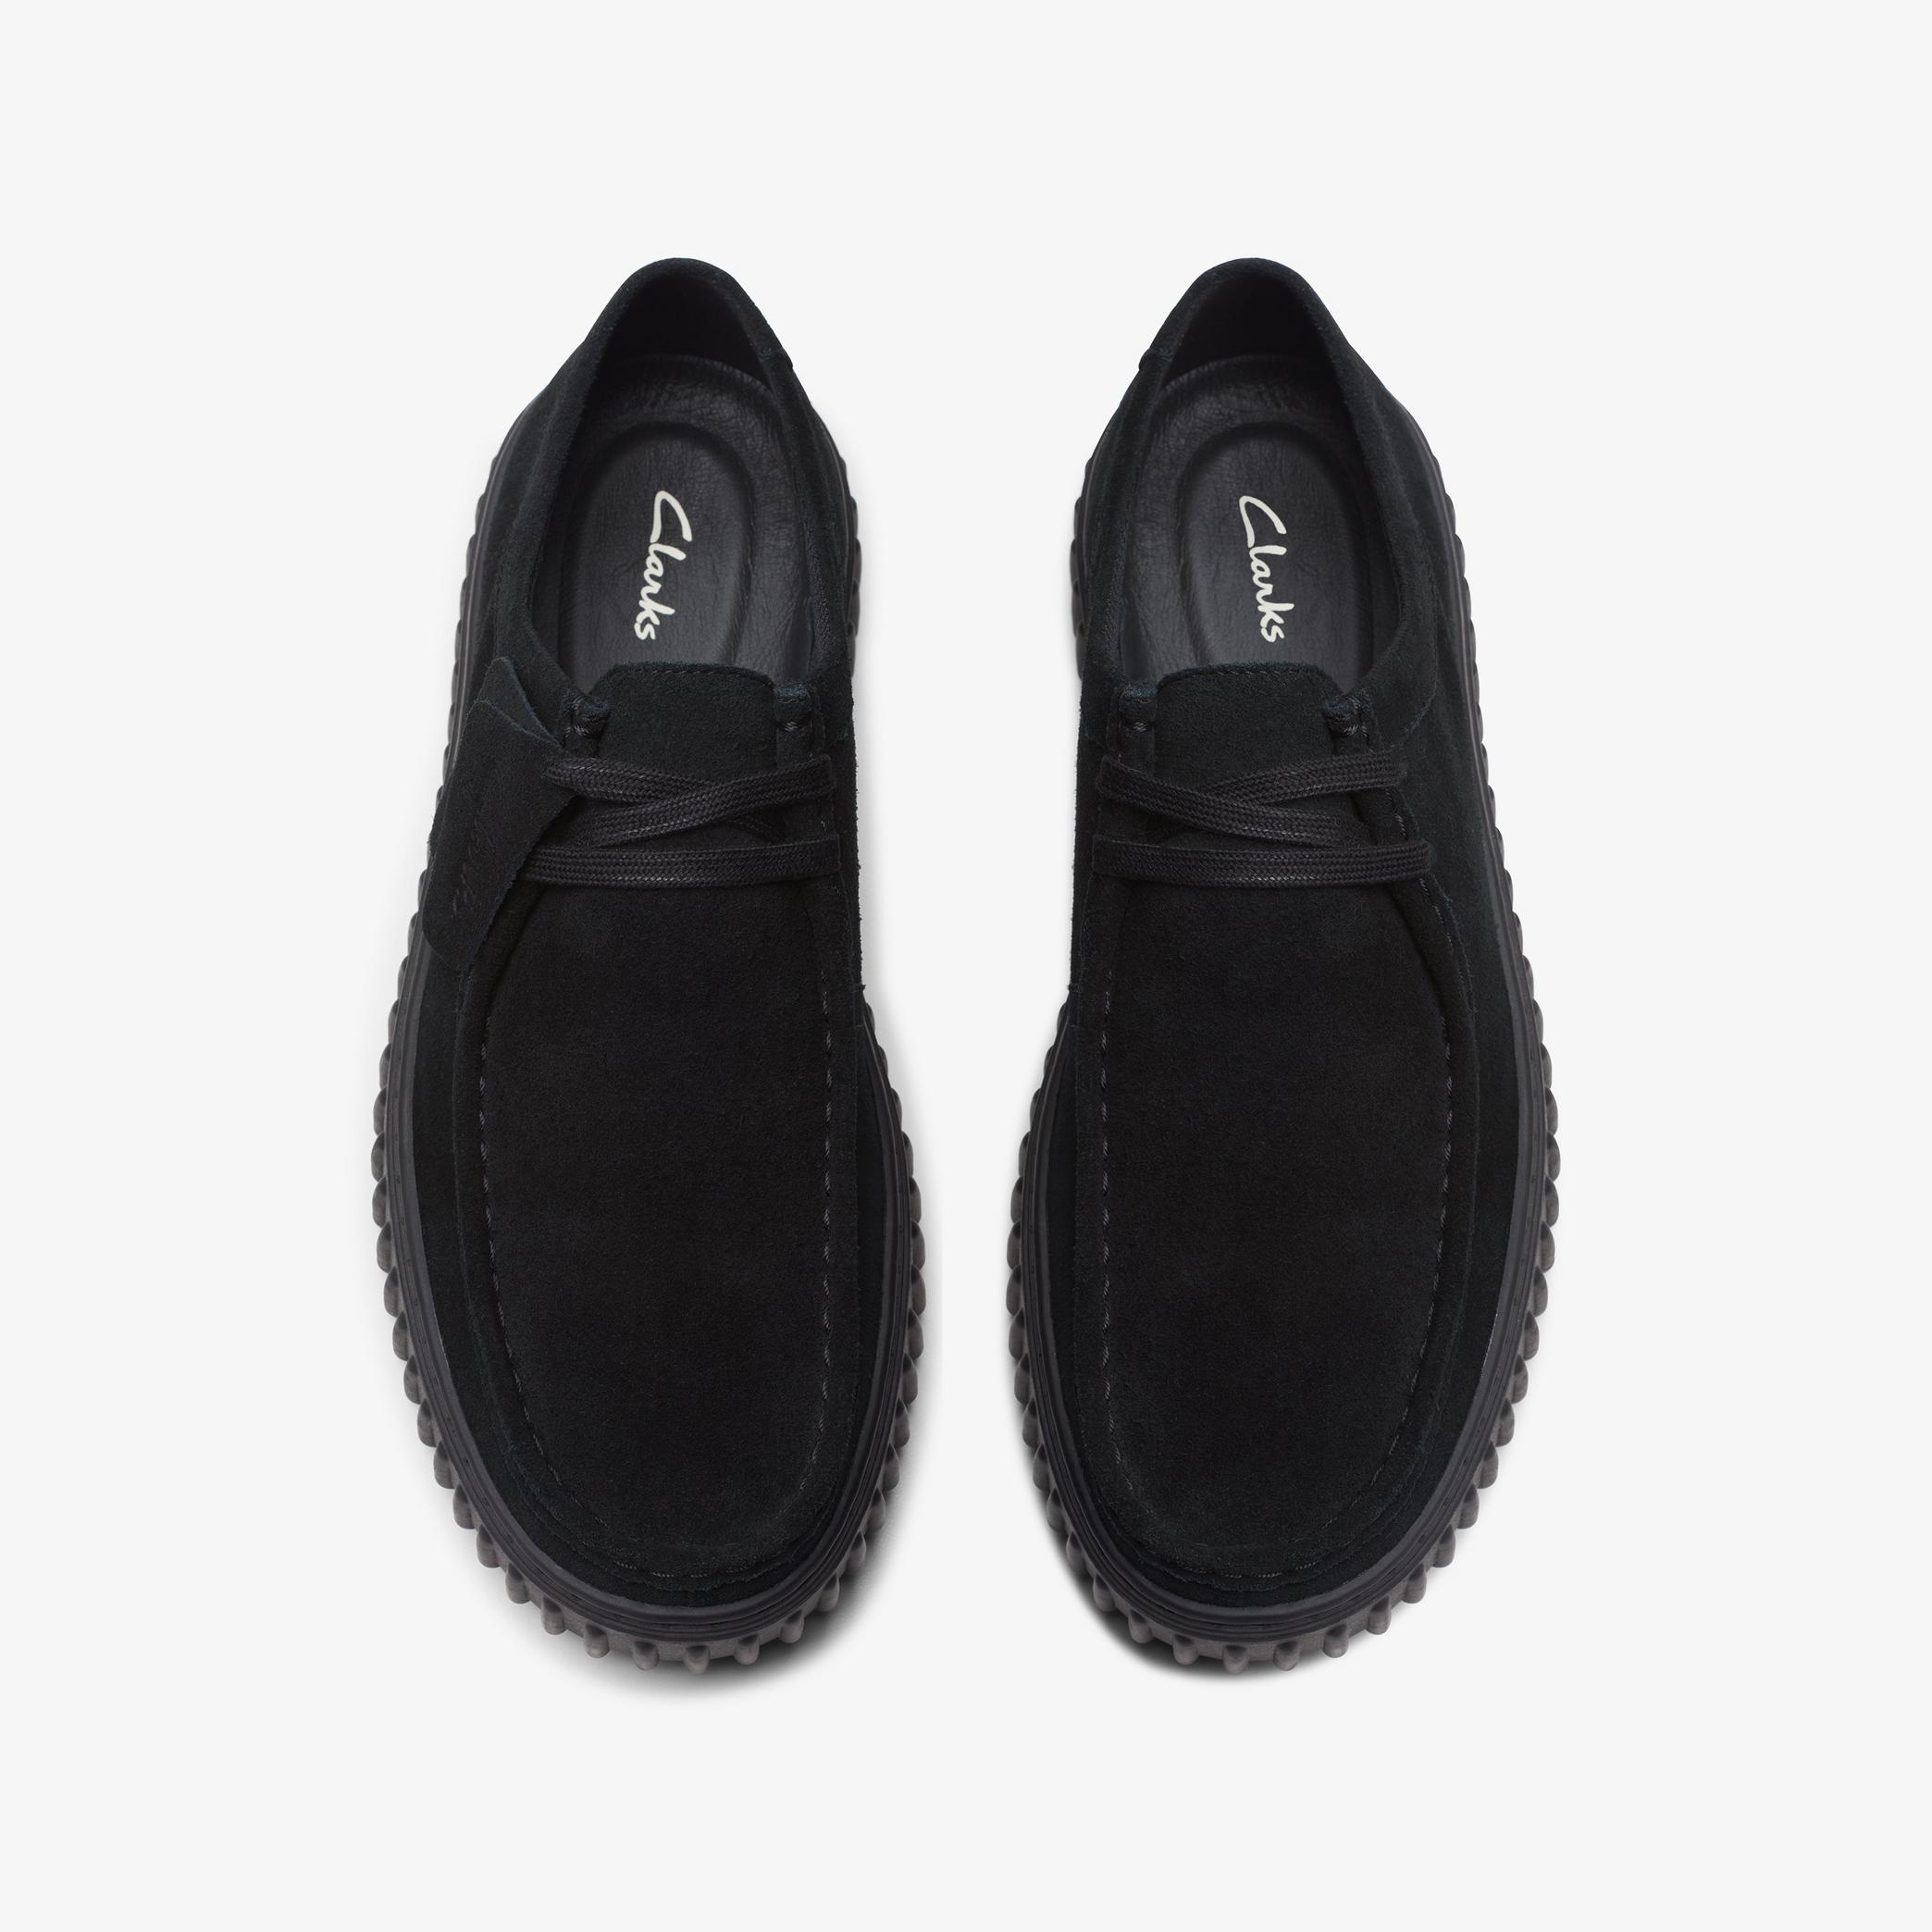 Torhill Lo Black Suede Moccasins, view 6 of 6